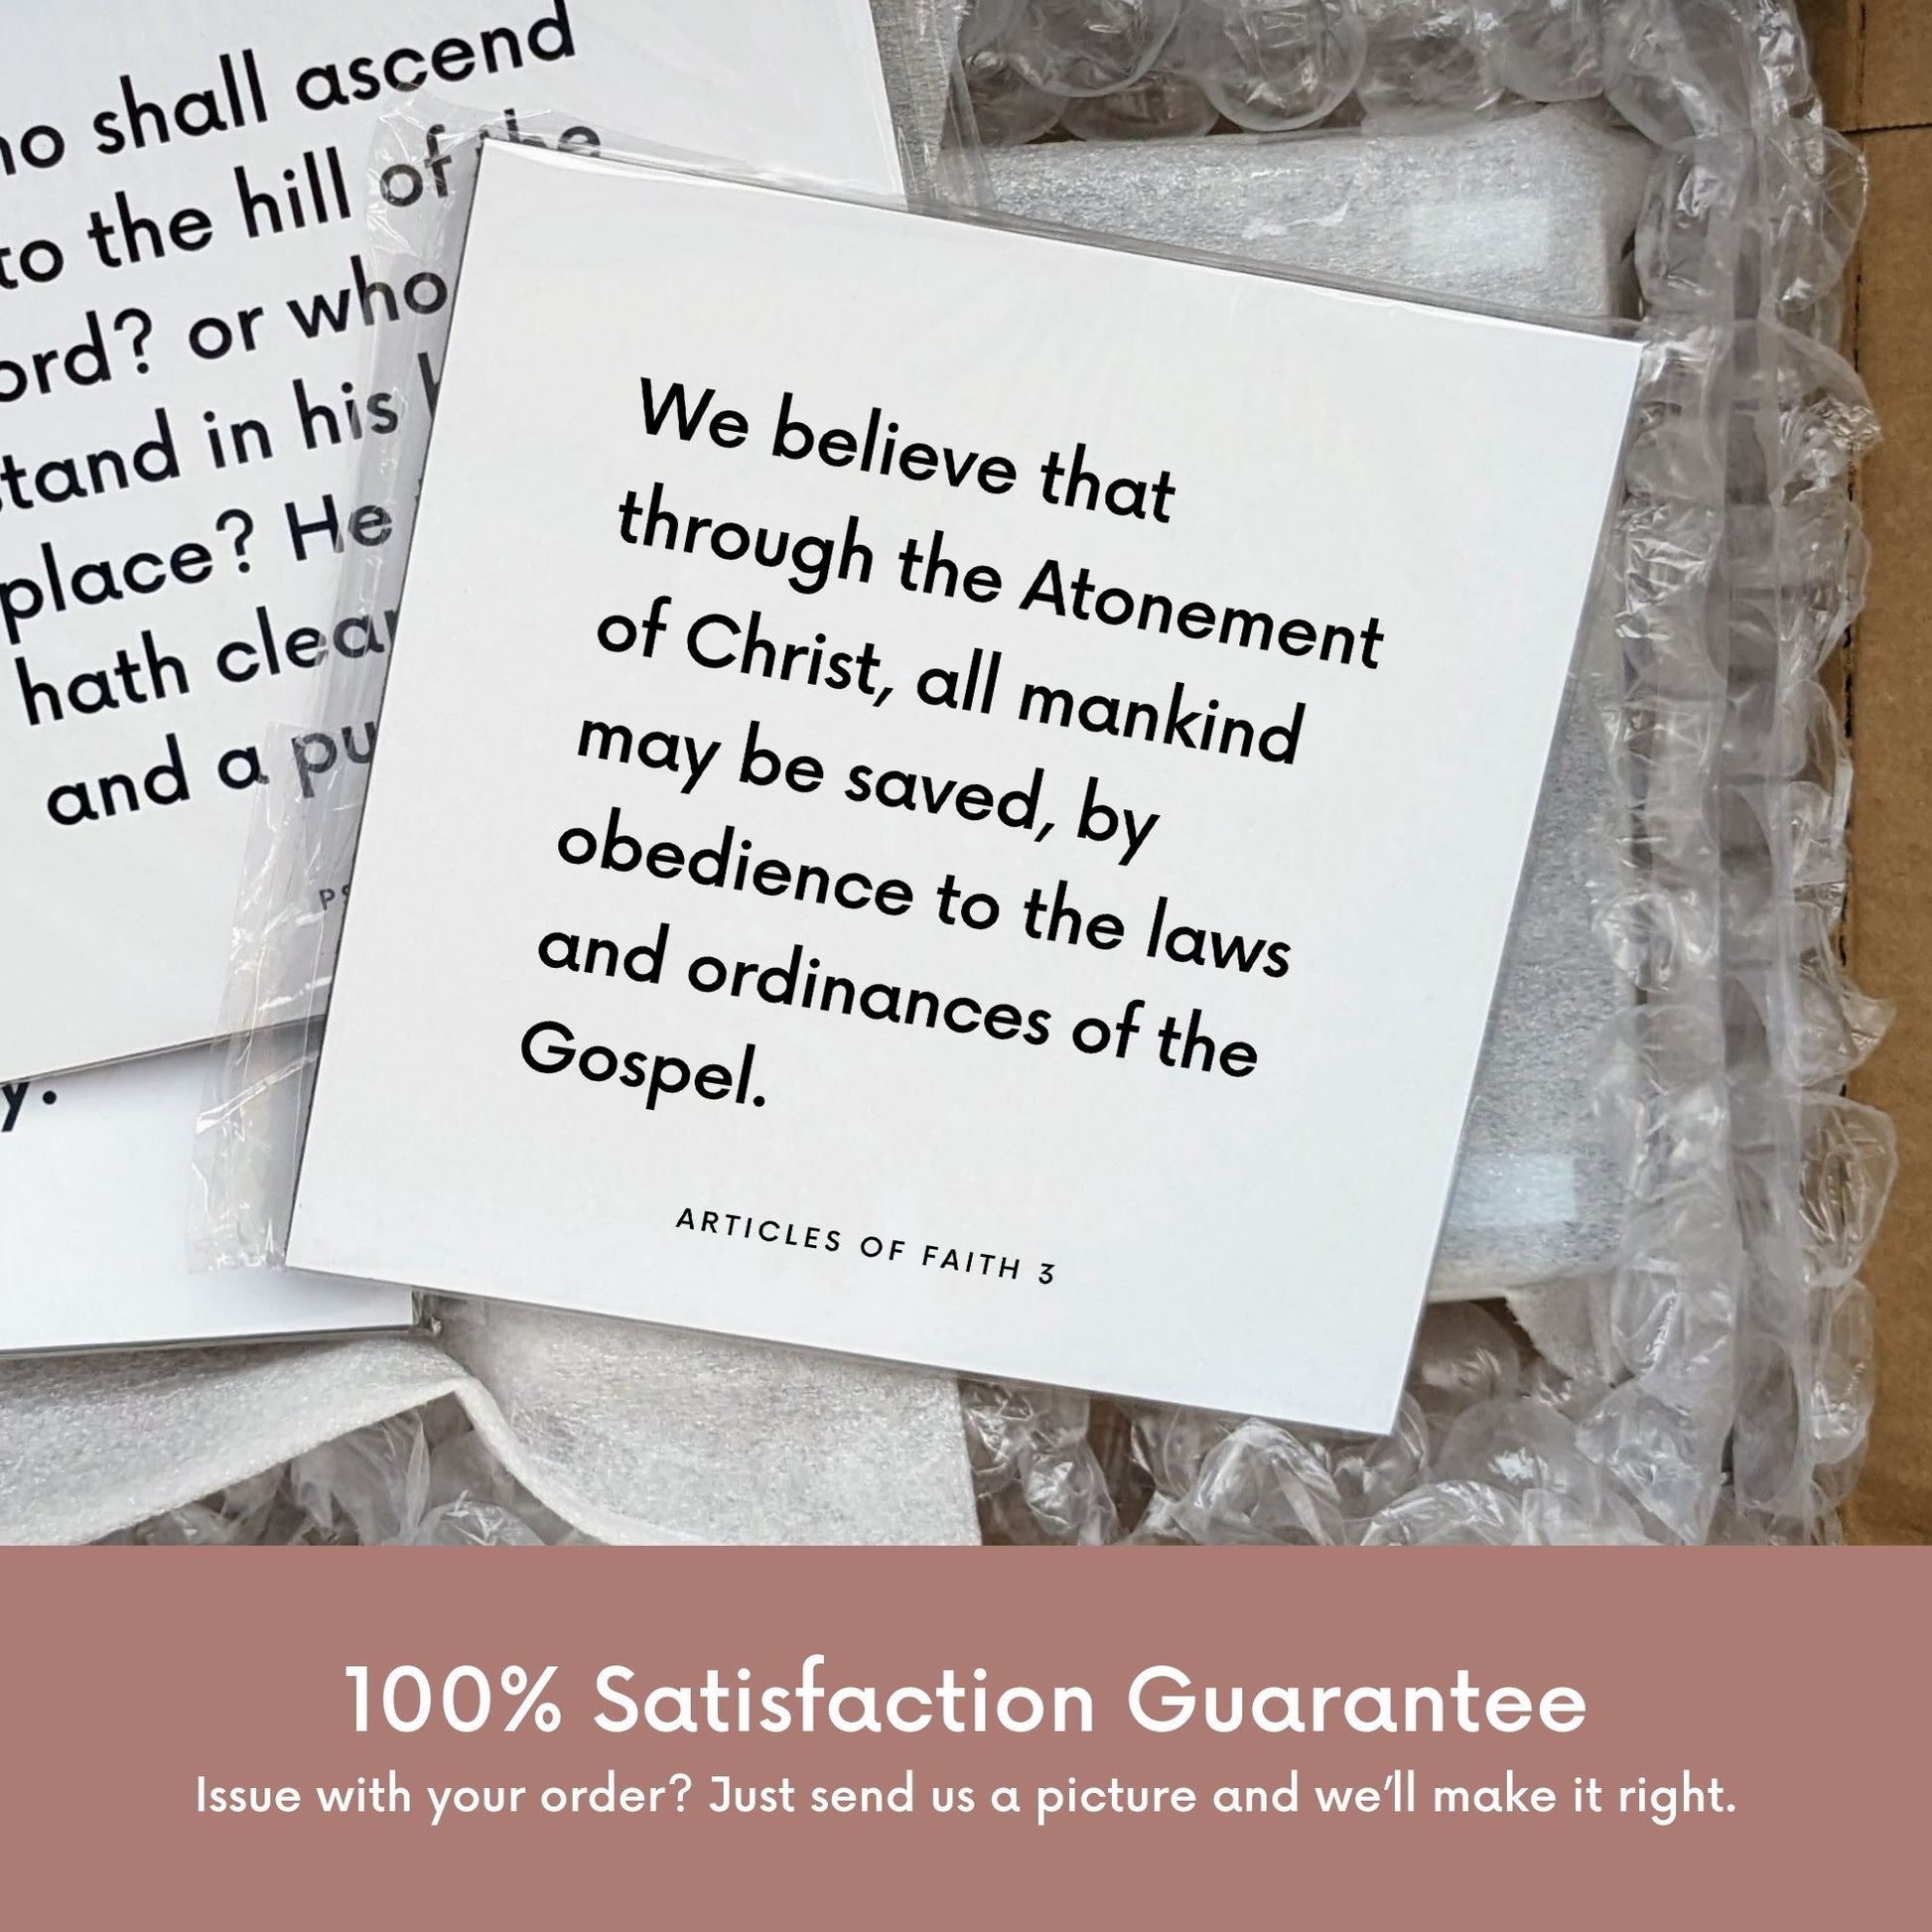 Shipping materials for scripture tile of Articles of Faith 3 - "We believe that through the Atonement of Christ"